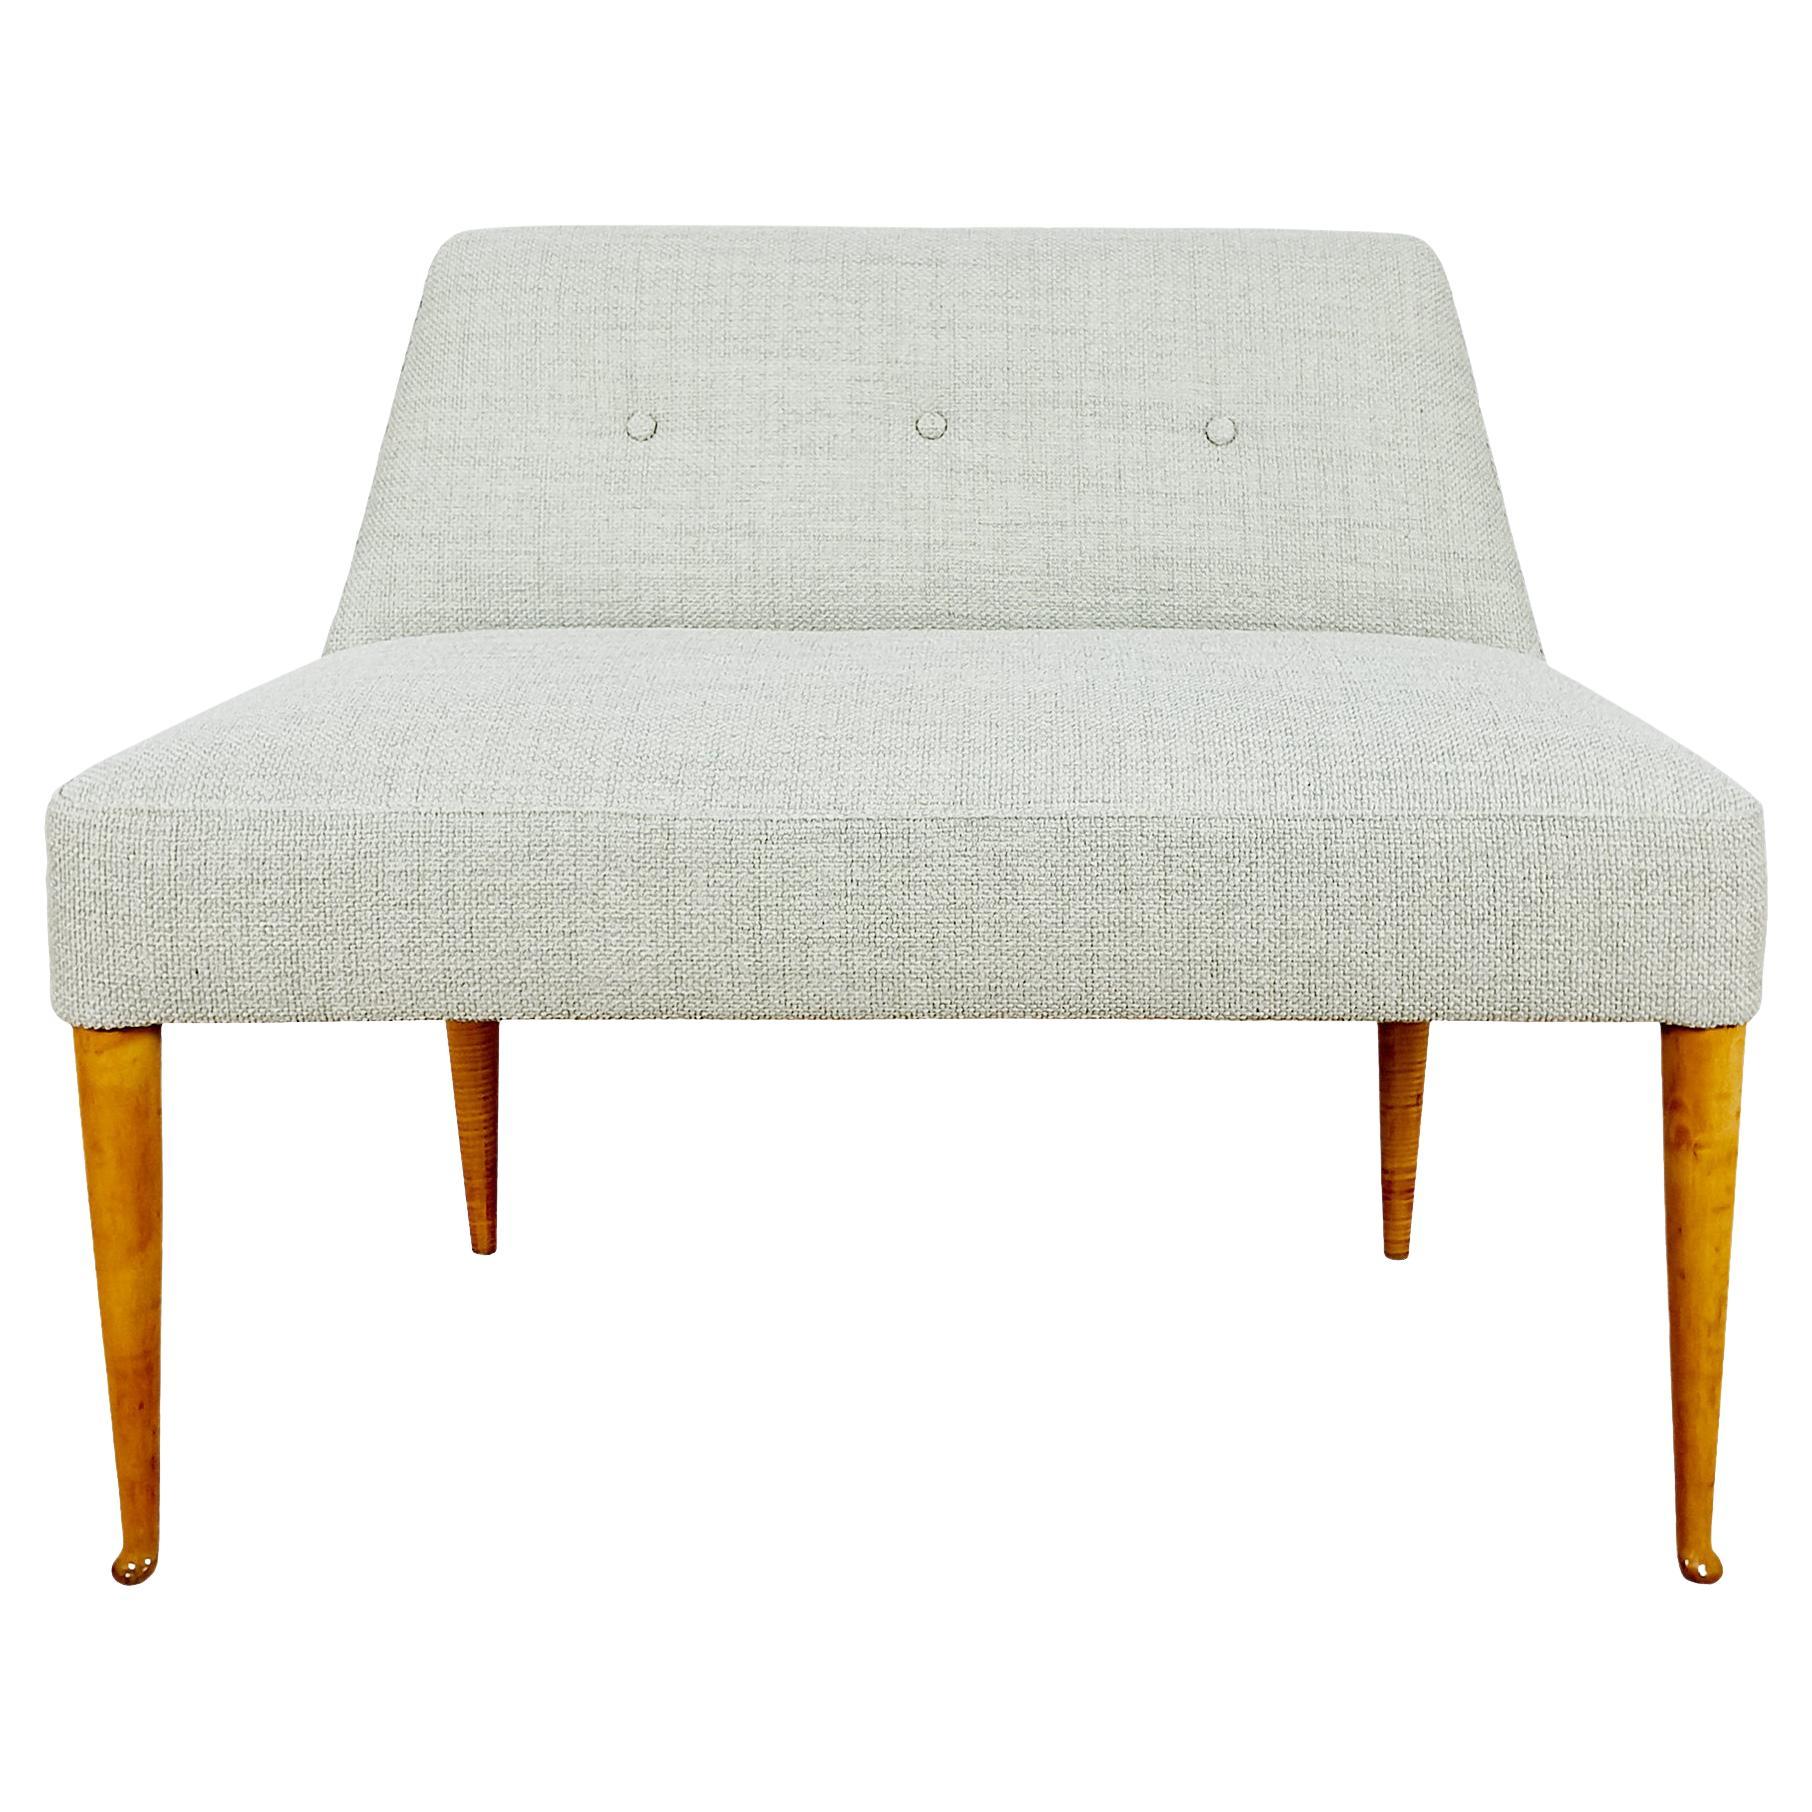 Small MId-Century Modern Bench in Greige Chenille Fabric - Italy, Early 1950s For Sale